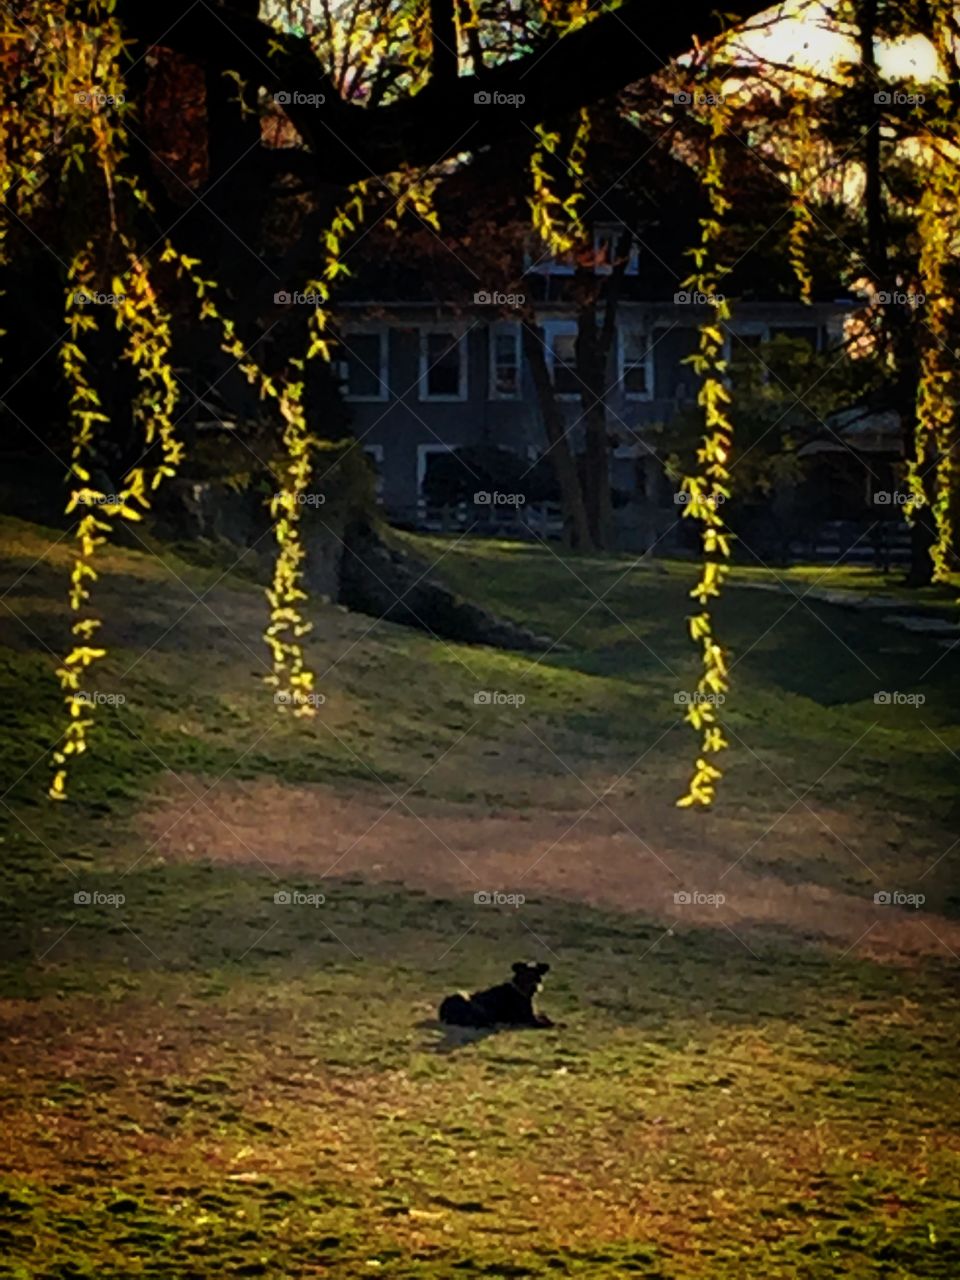 Picturesque scene of a little black puppy laying in the grass of a large rolling lawn. 